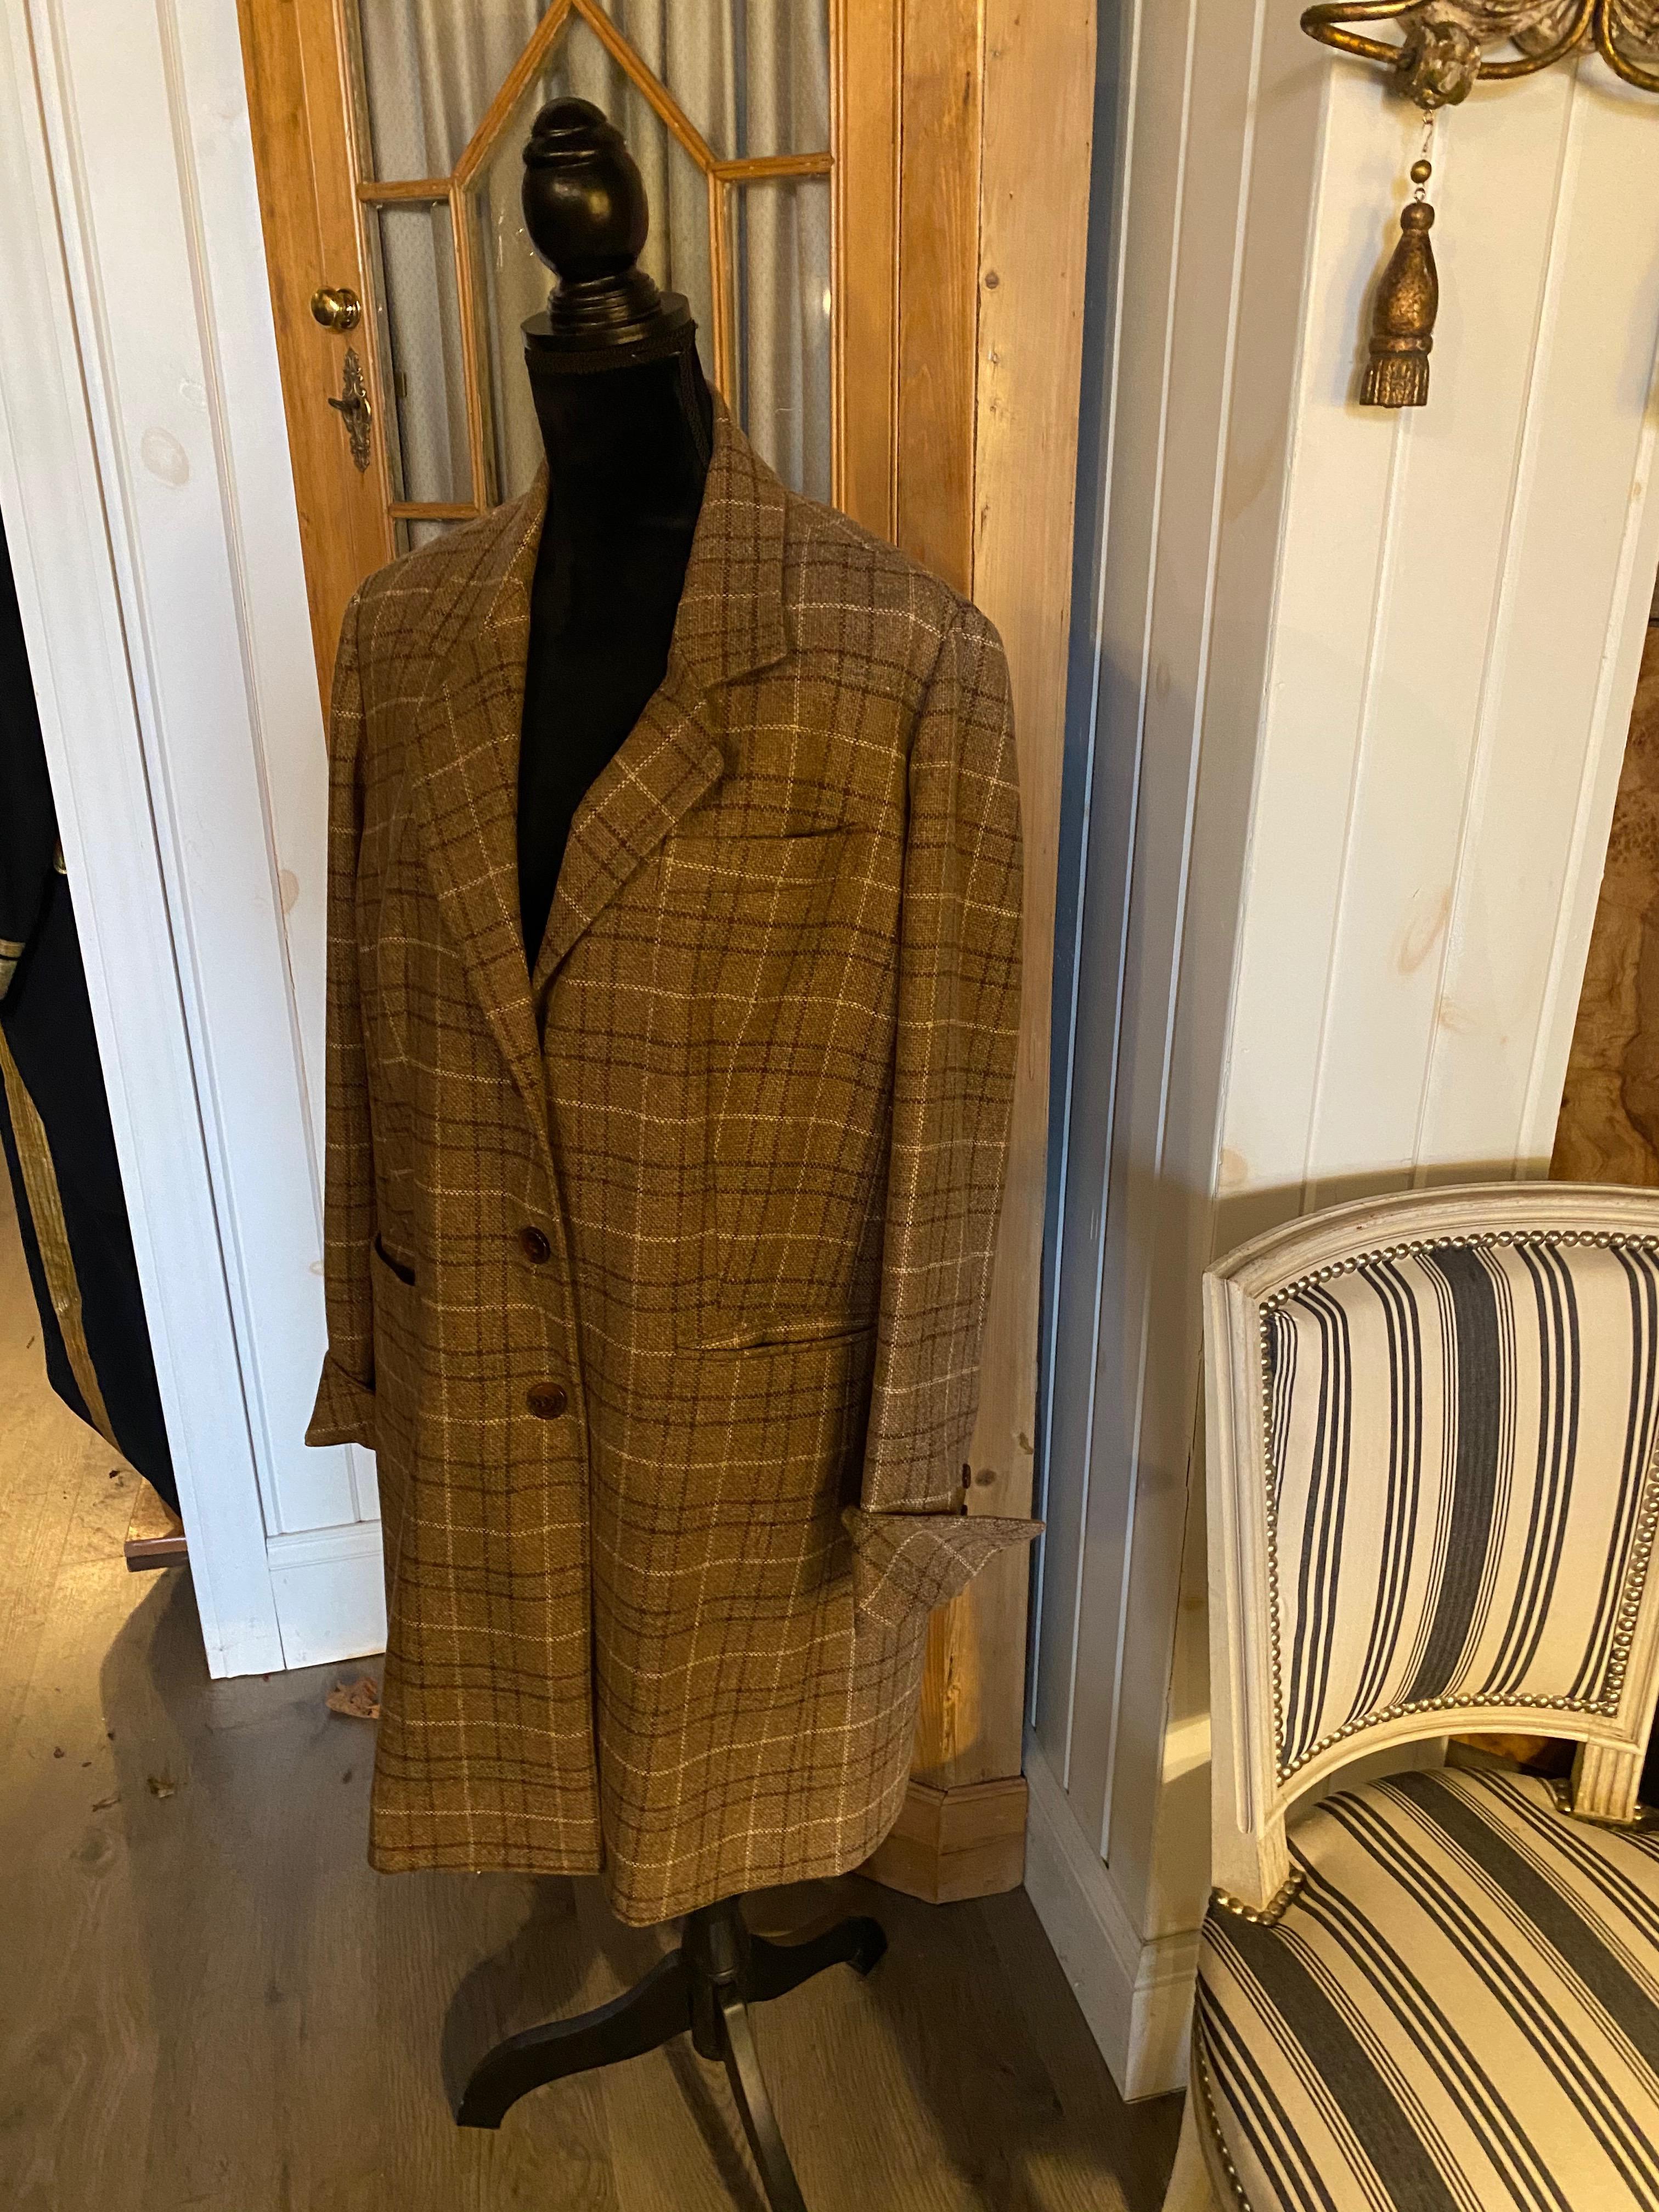 TWO SAM KORI GEORGE CASHMERE COATS.
Priced per coat. Only worn once.
Comprising of a grey and yellow window pane coat and a brown, blue, and white plaid
Approximately size 10-12

